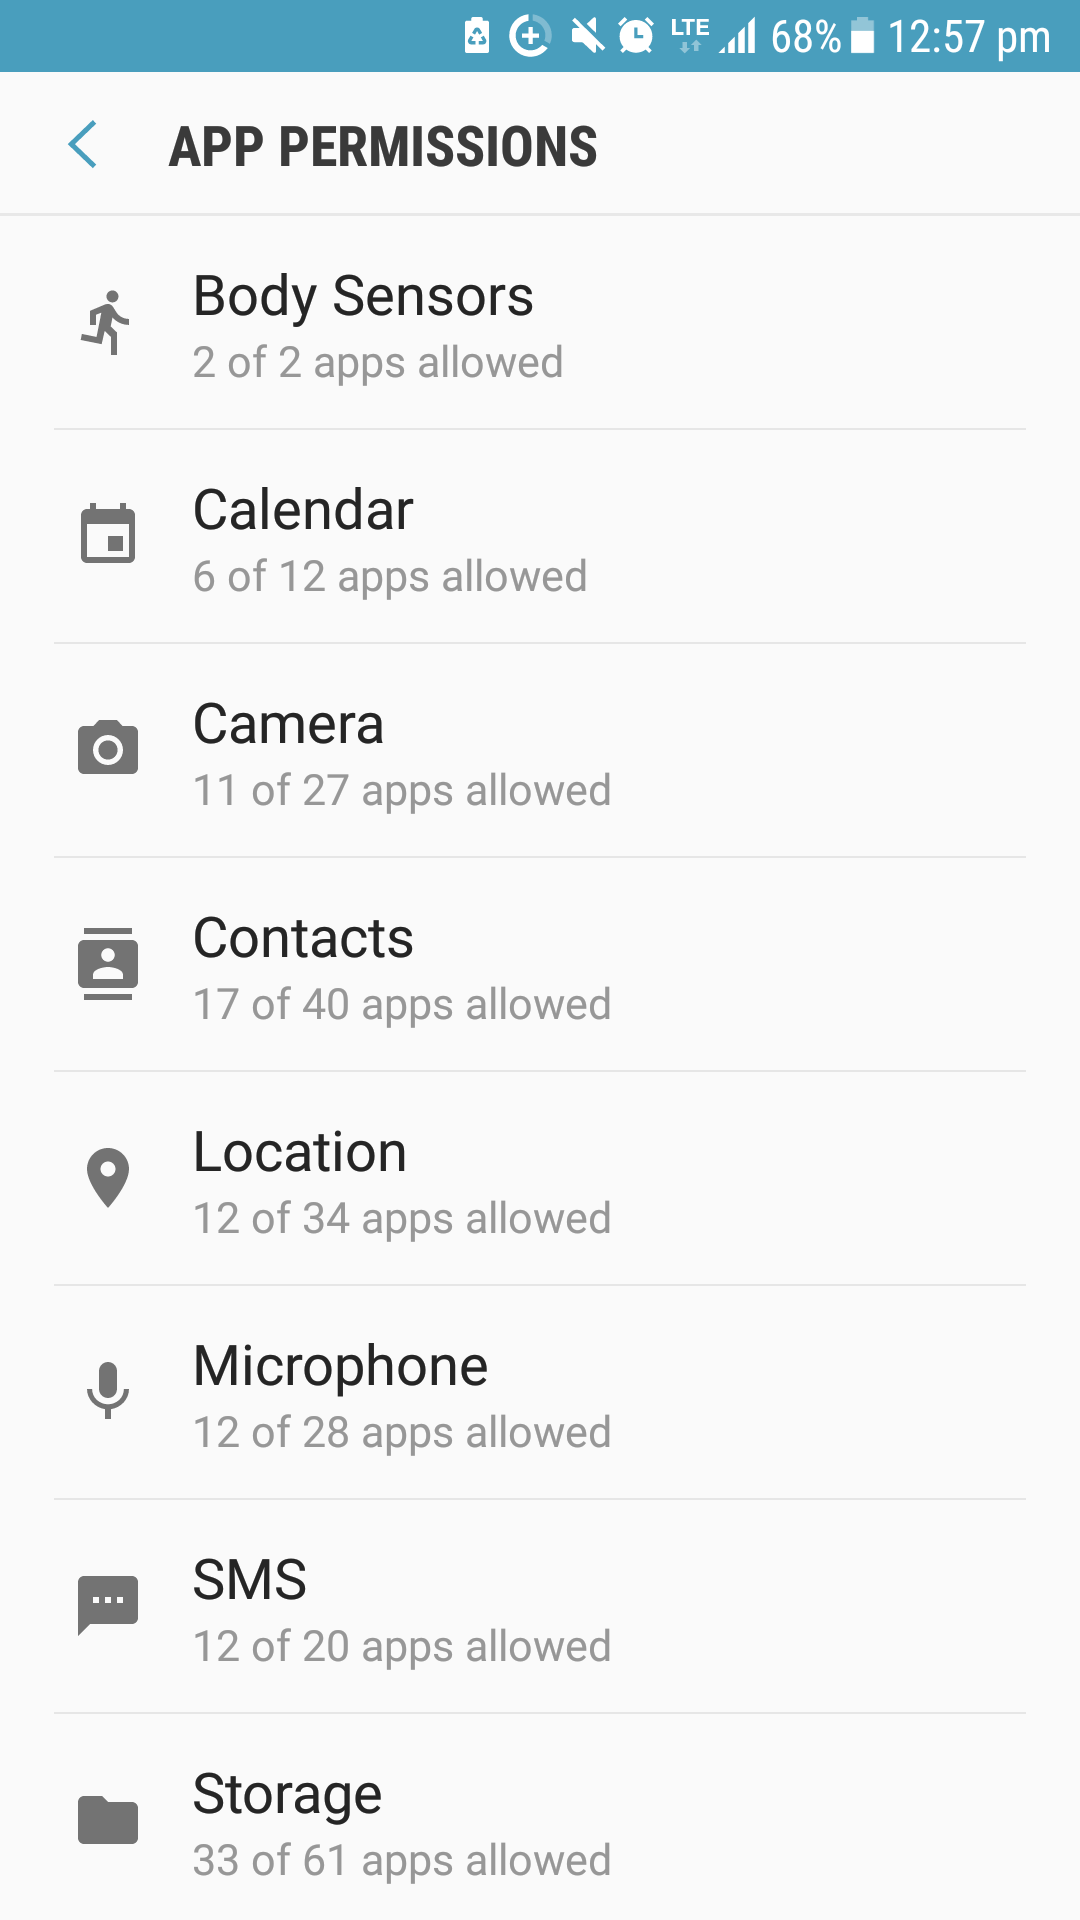 Android Nougat - App Permissions